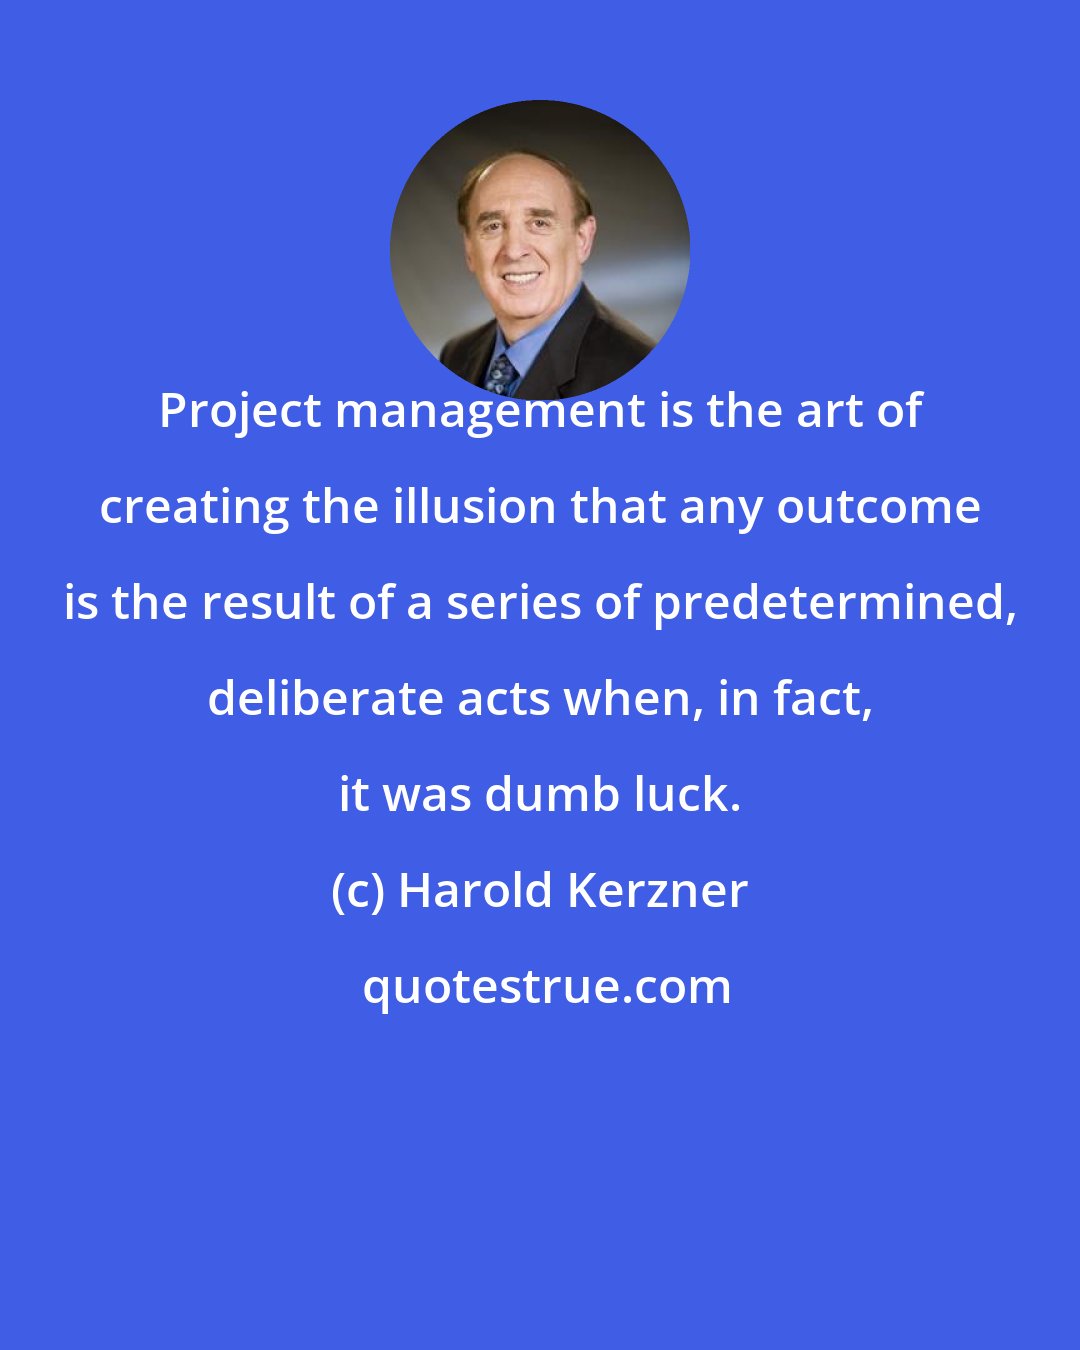 Harold Kerzner: Project management is the art of creating the illusion that any outcome is the result of a series of predetermined, deliberate acts when, in fact, it was dumb luck.